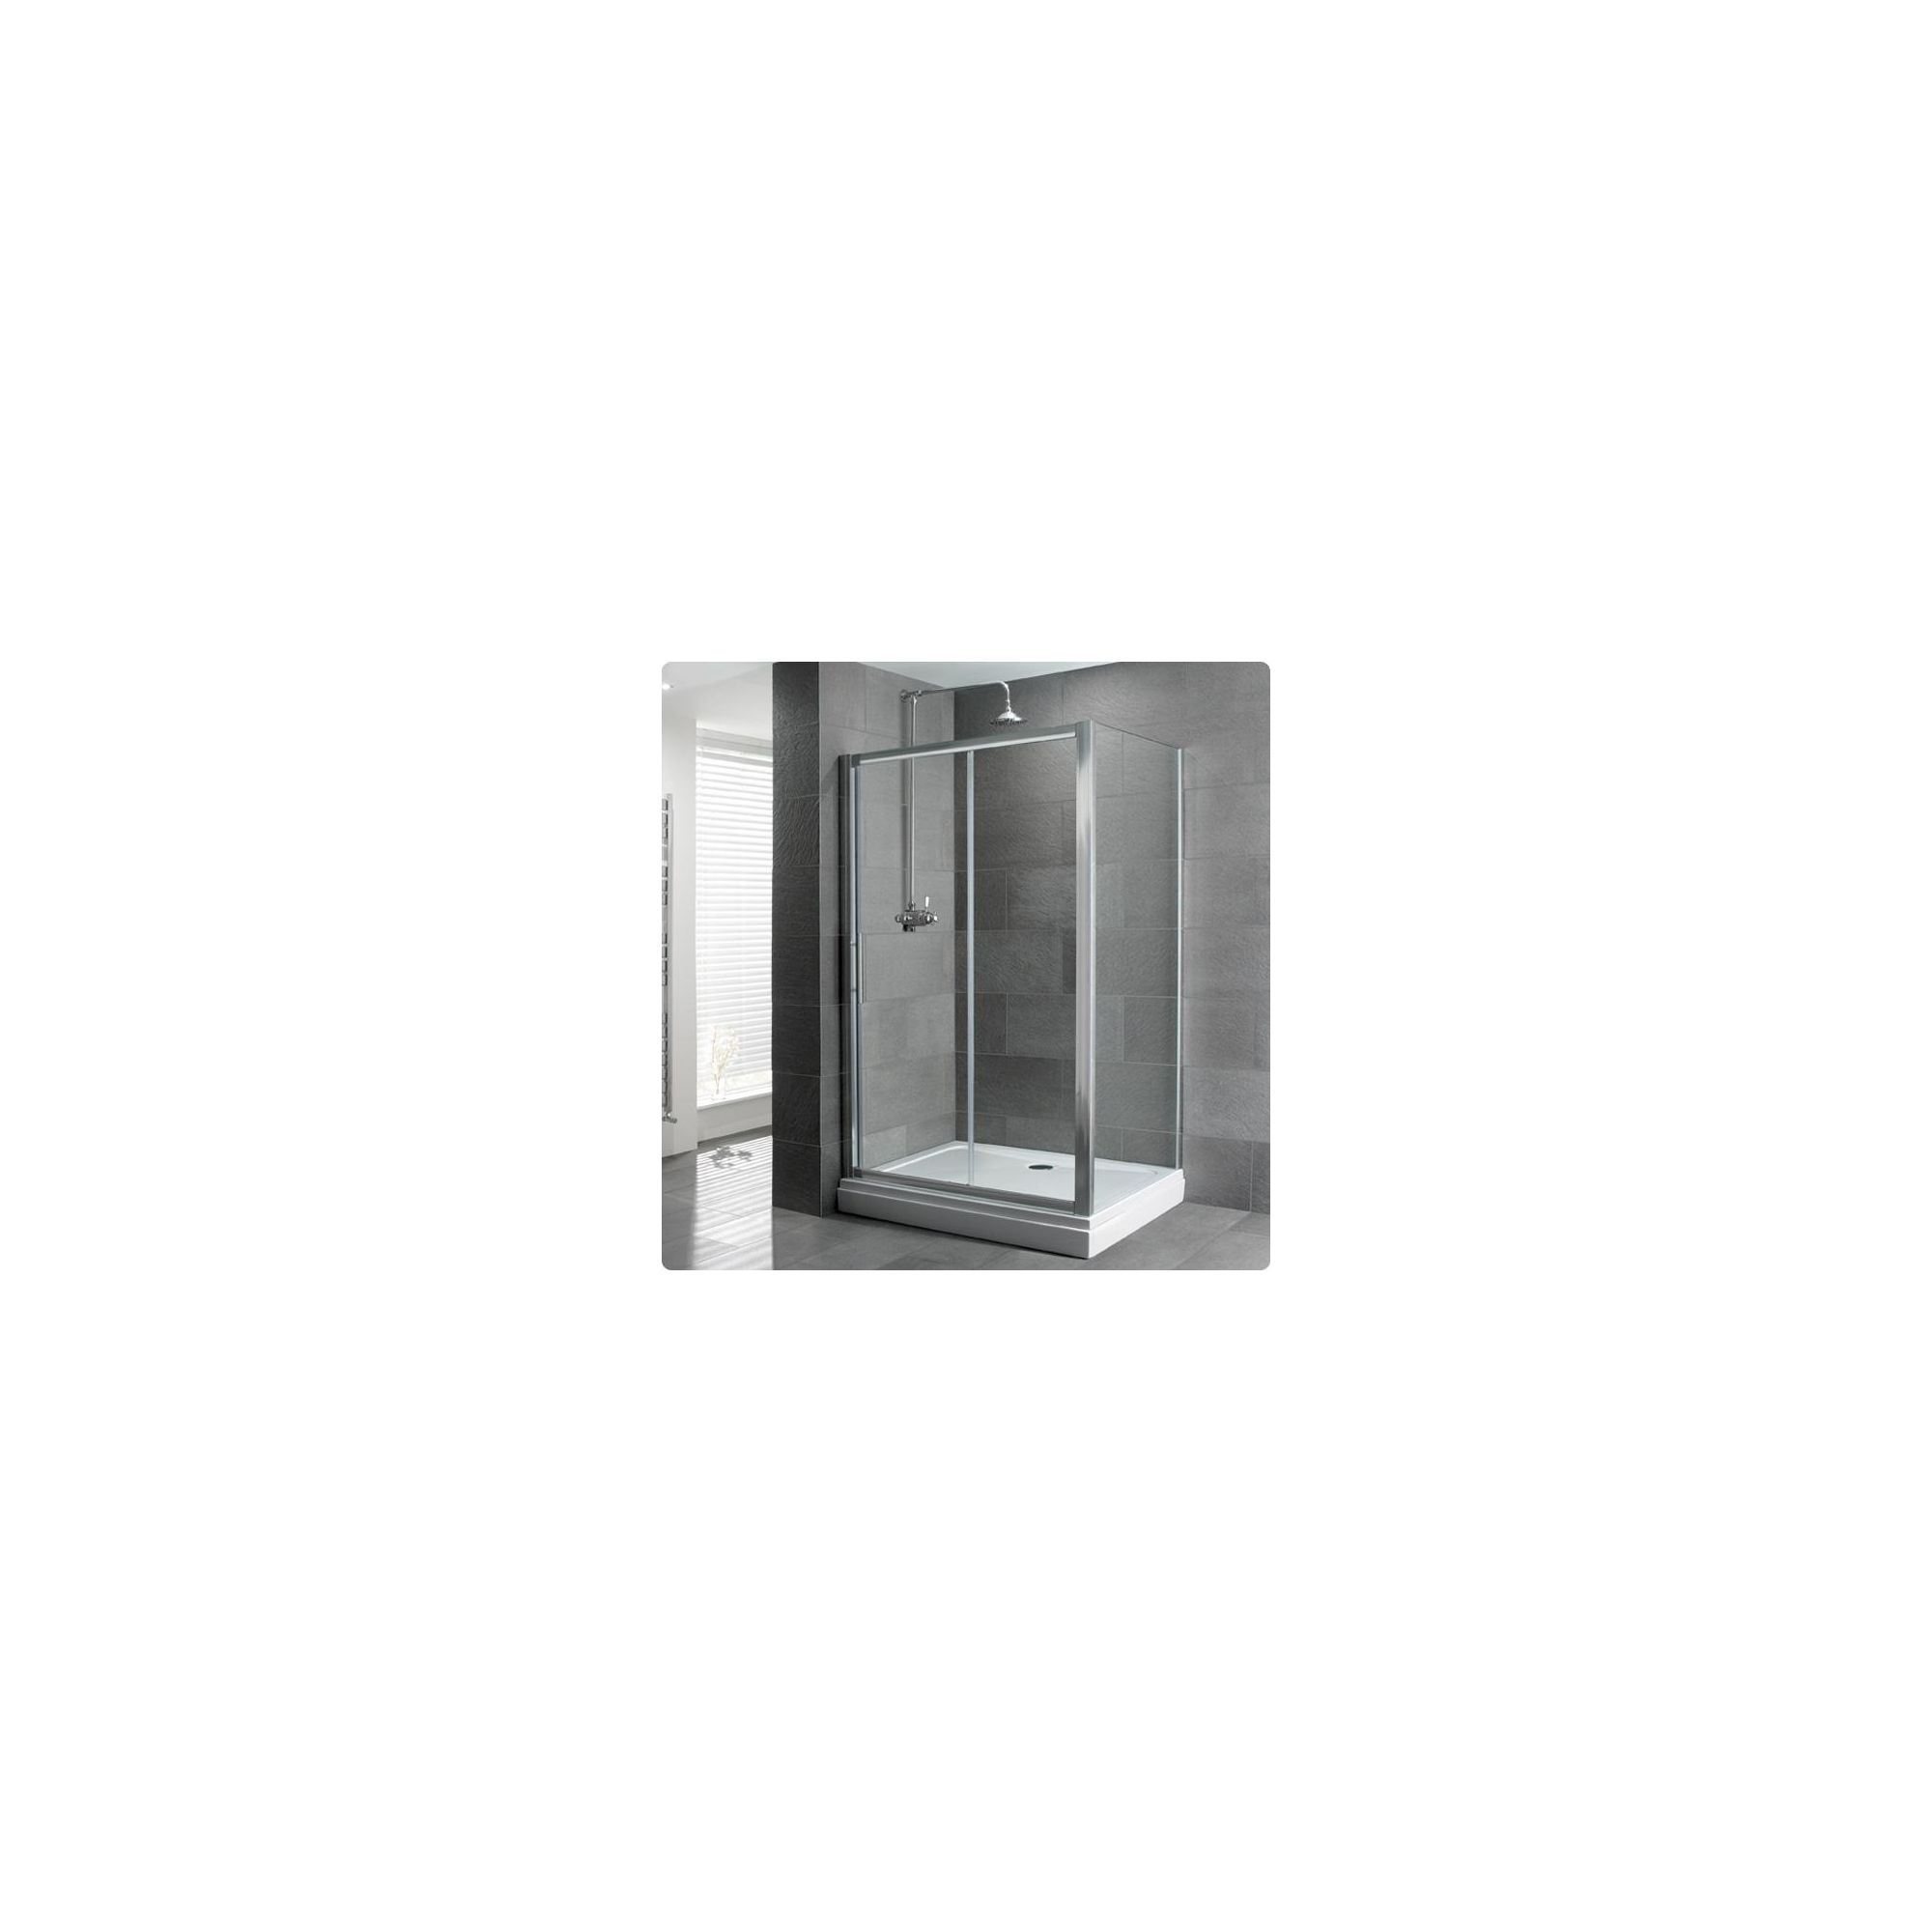 Duchy Select Silver Single Sliding Door Shower Enclosure, 1100mm x 900mm, Standard Tray, 6mm Glass at Tescos Direct